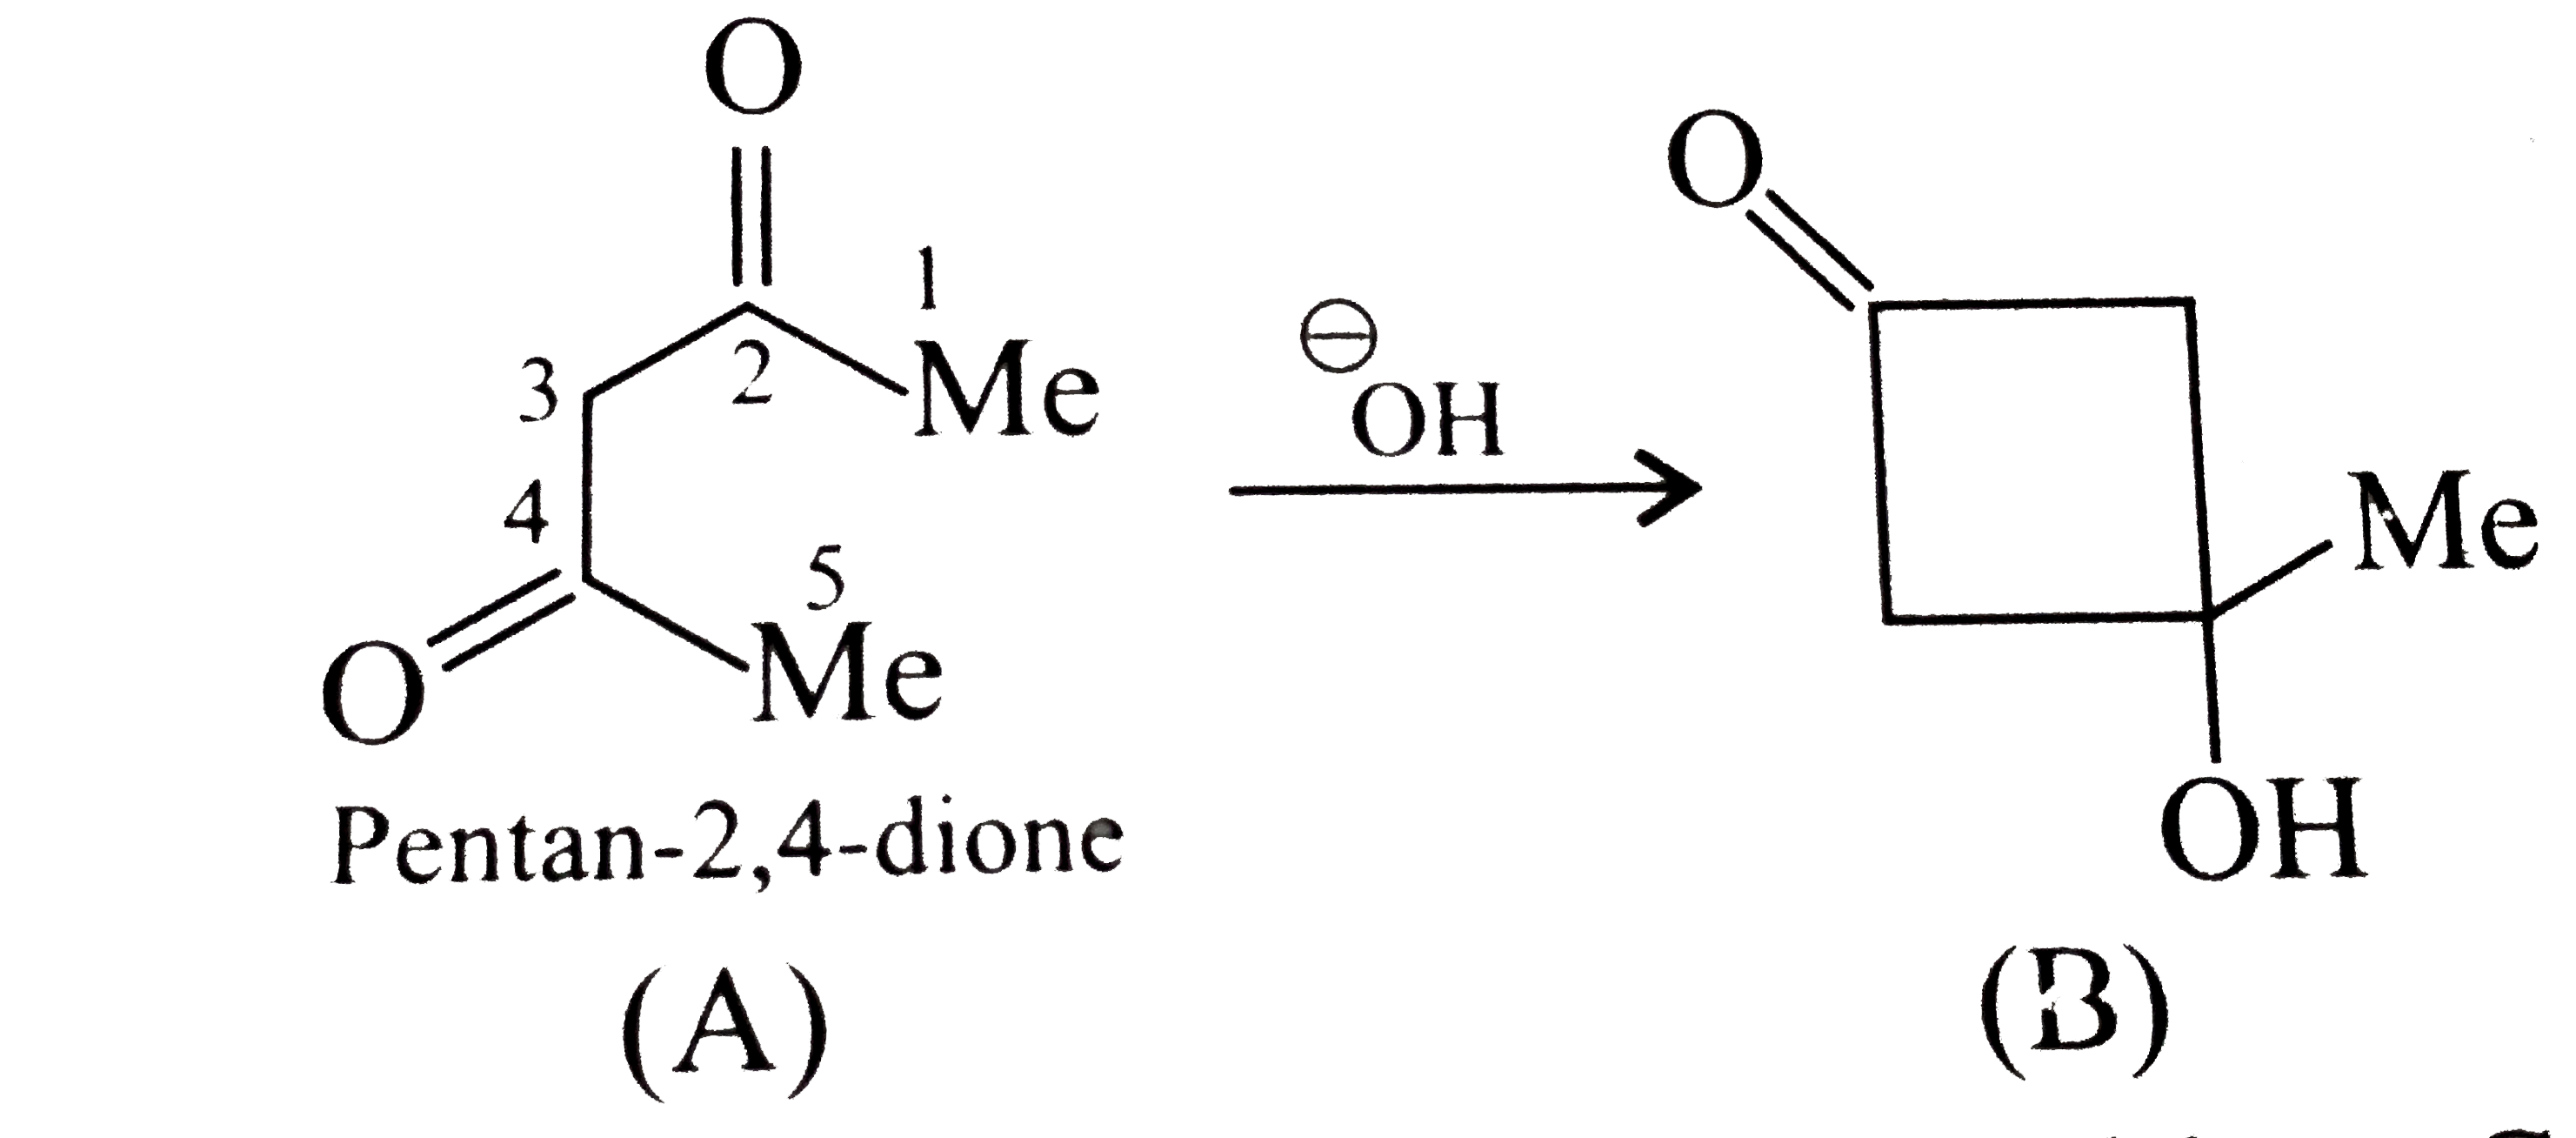 Assertion (A): The following intramolecular aldol reaction occurs.      Reason (R ): The carbanion does not add to C-4 because a strained four-membered ring would result.